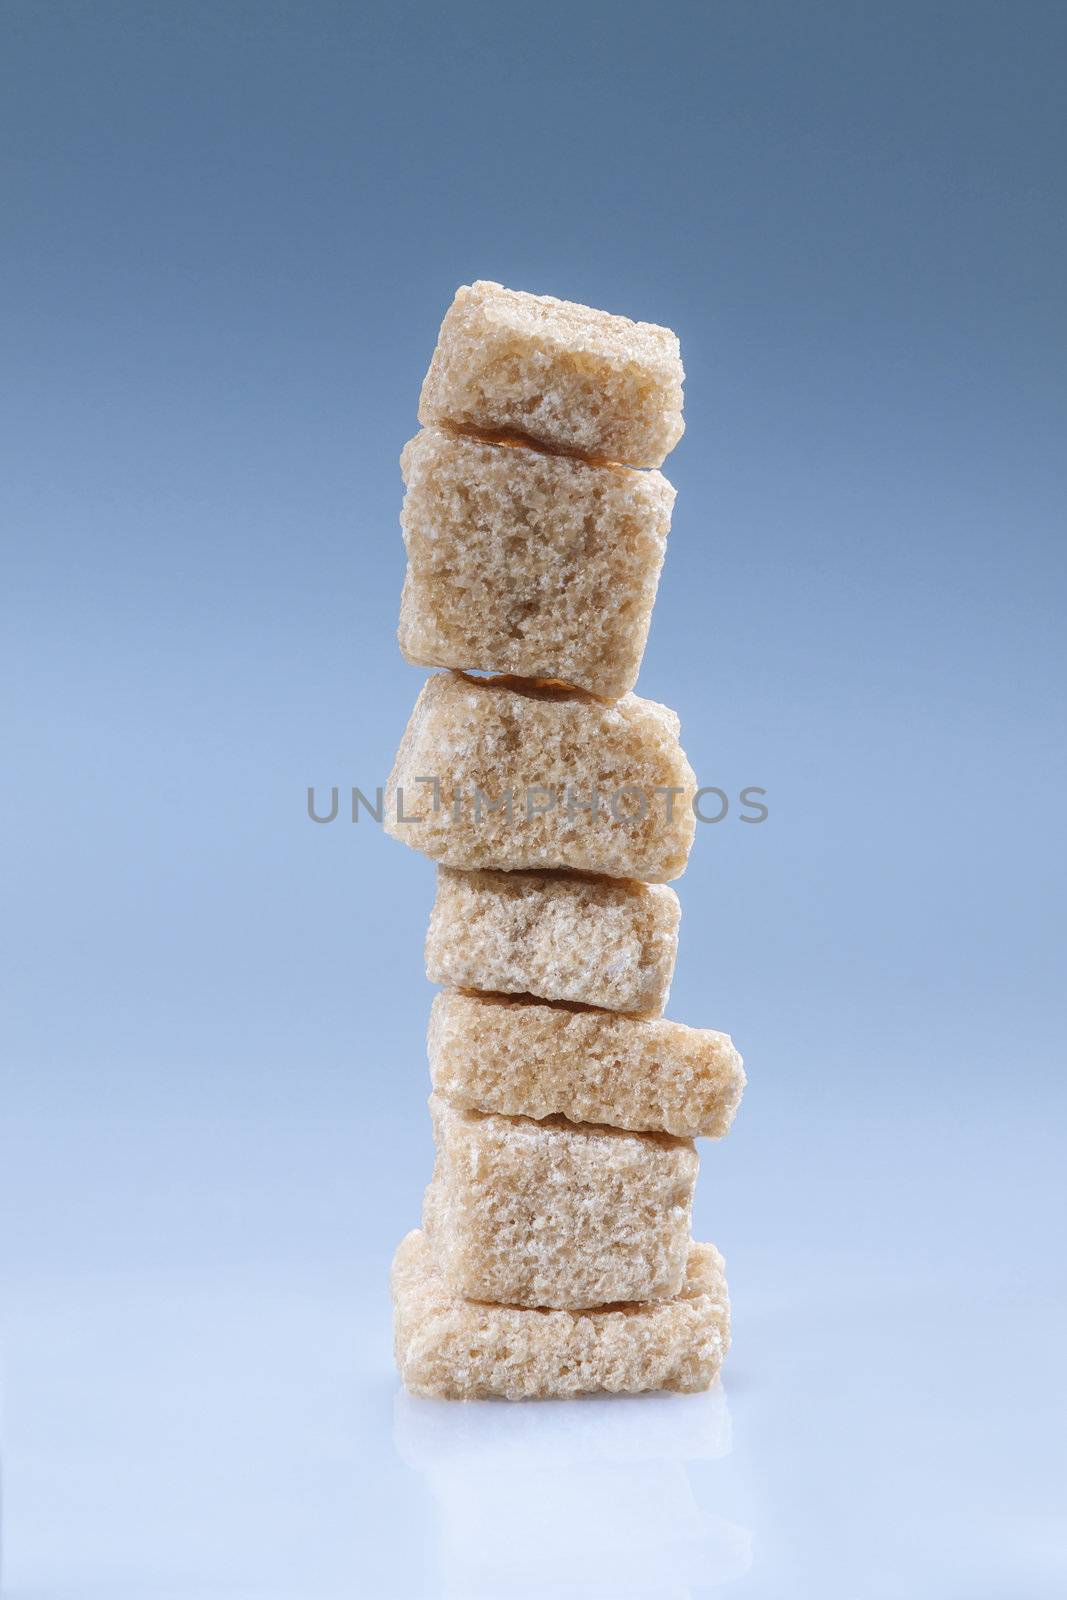 Vertical stack of brown sugar cubes on blue.